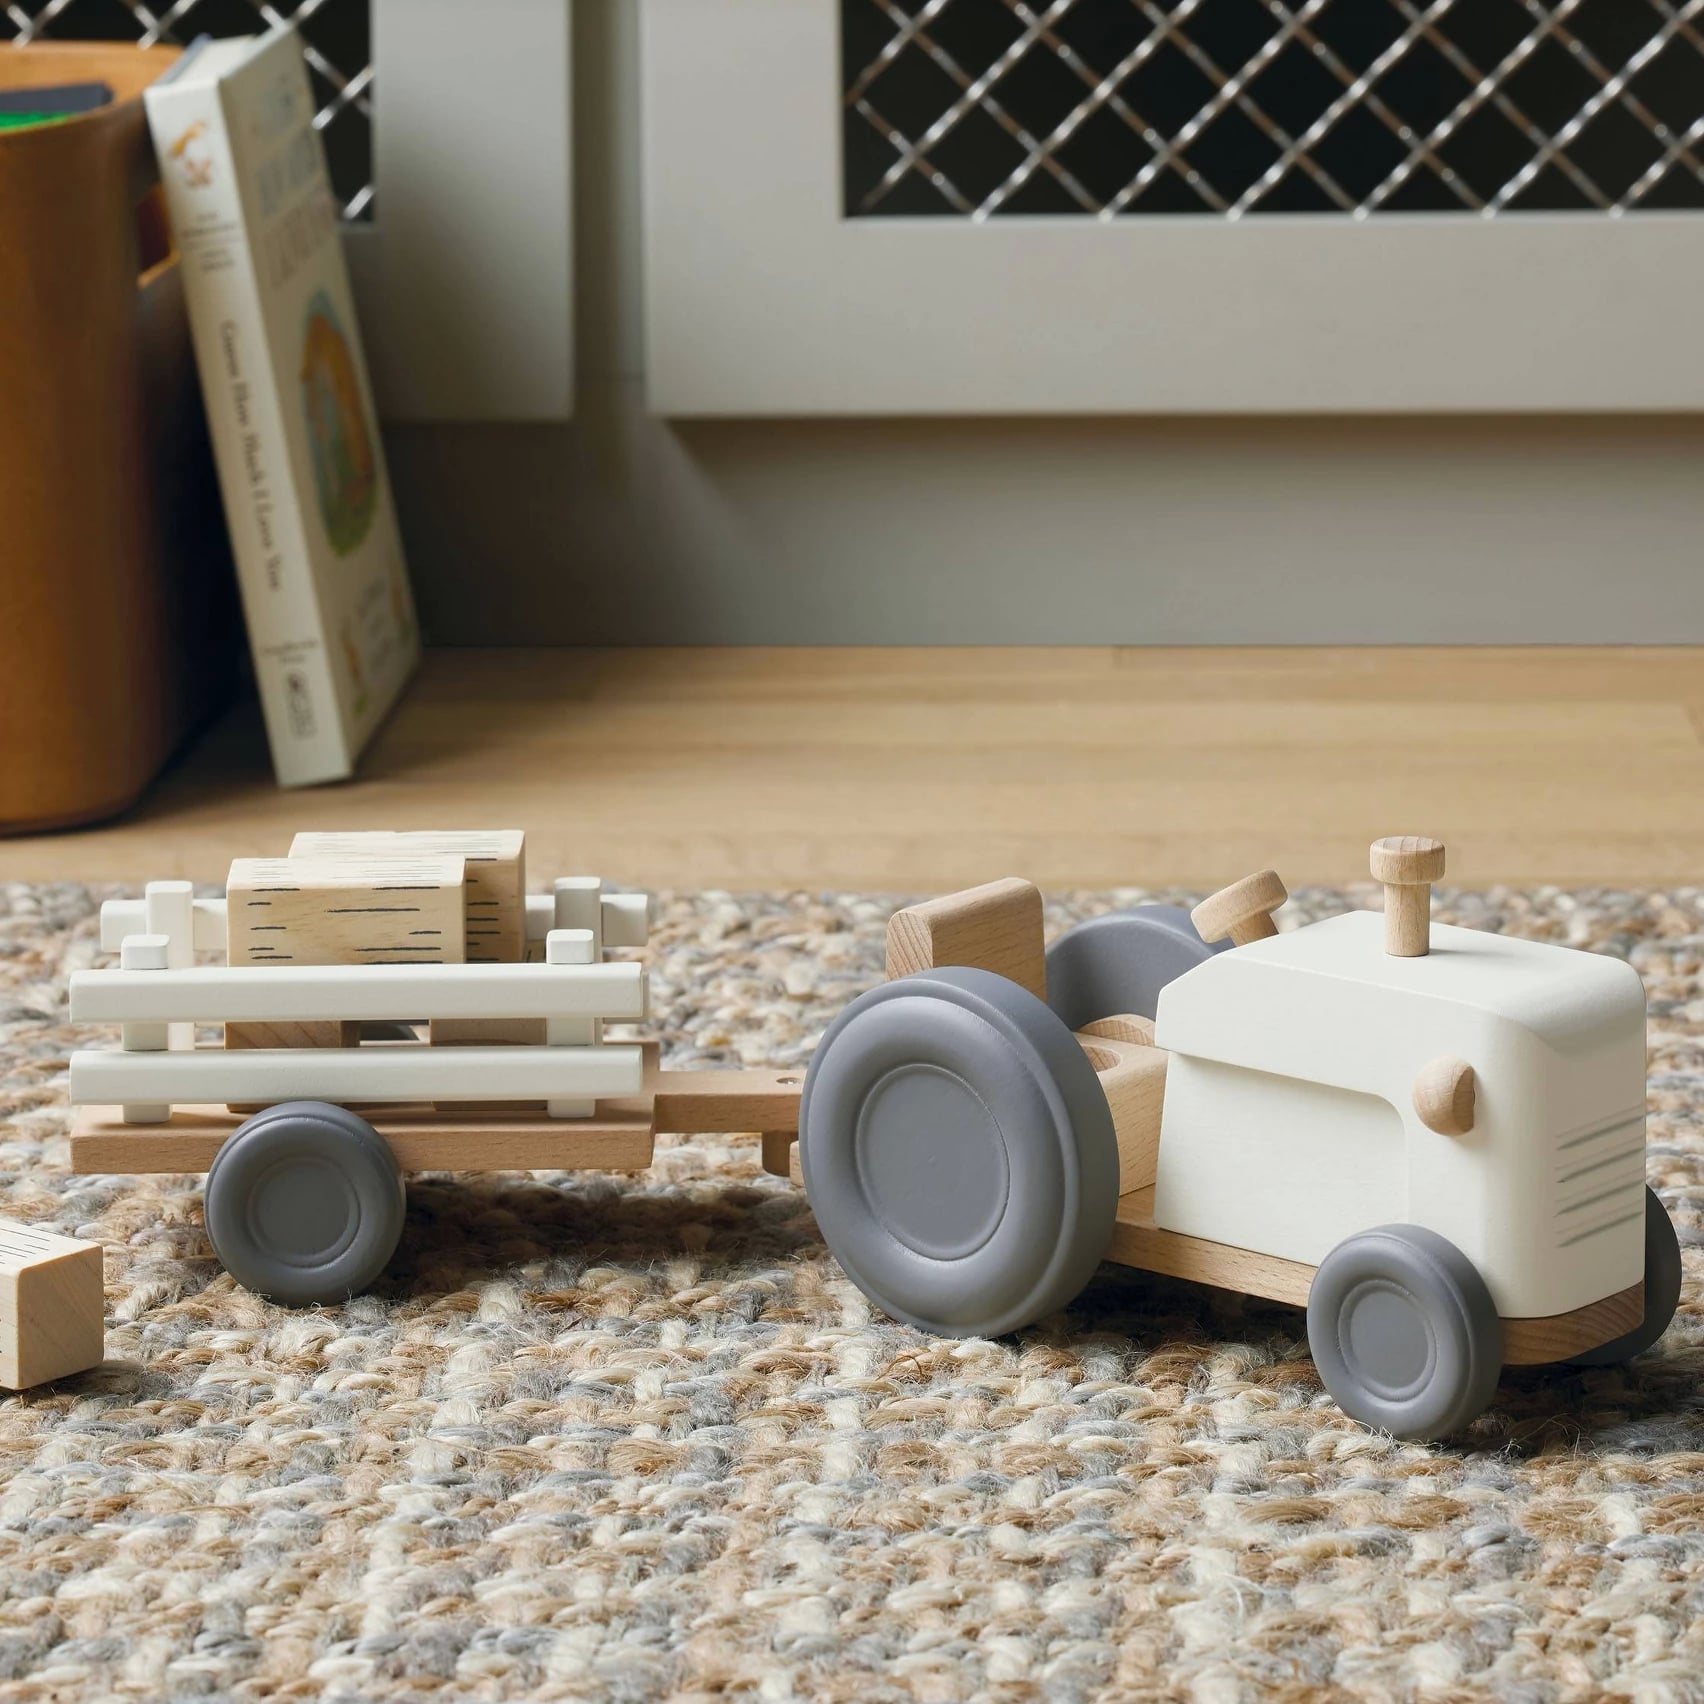 wooden baby toys target